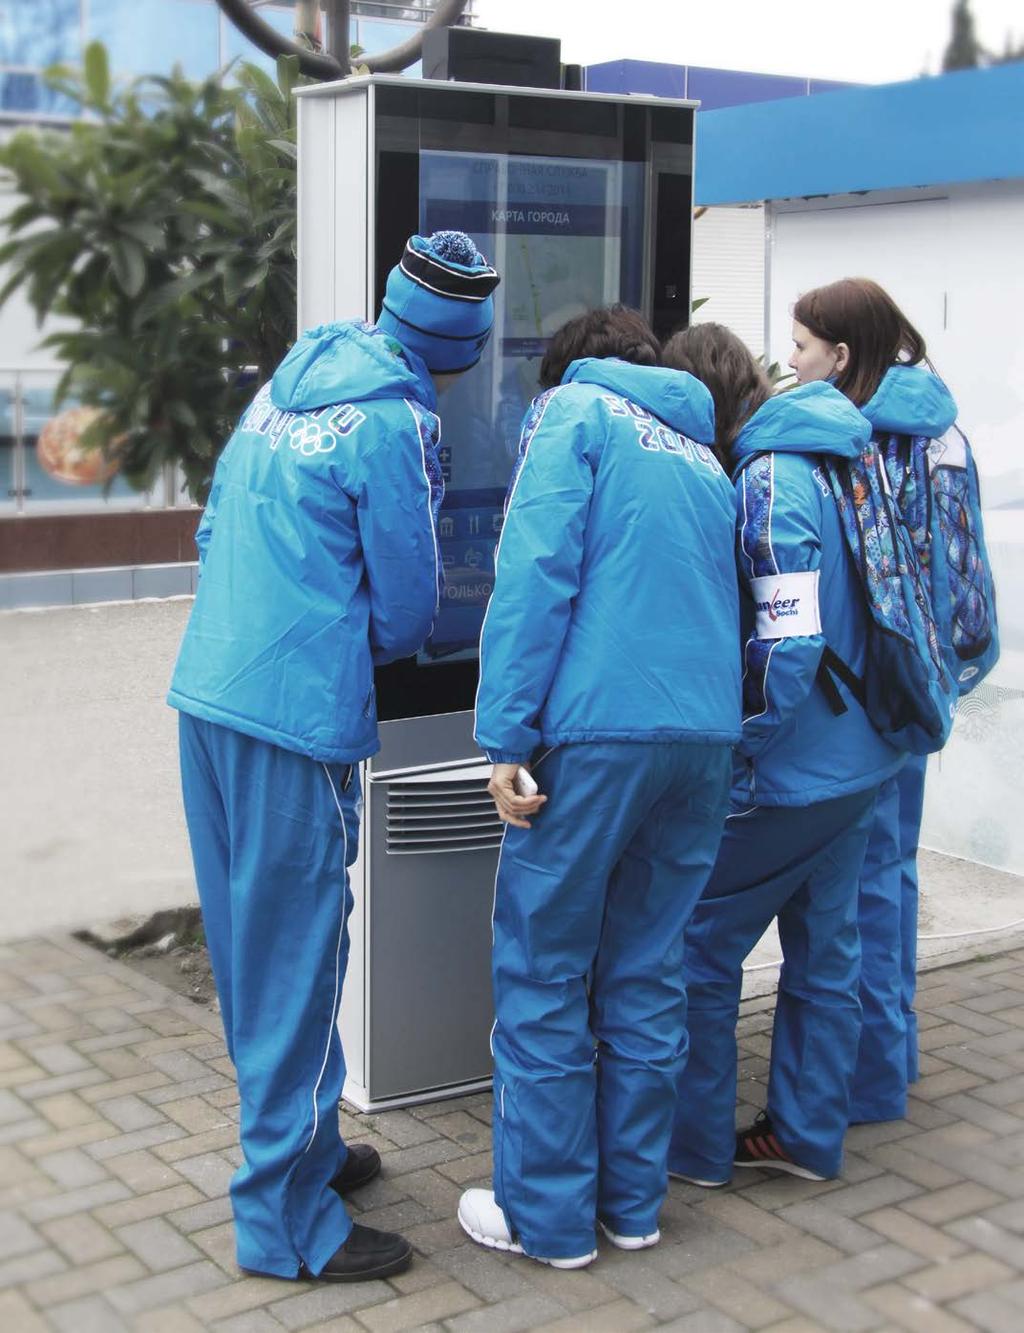 14 15 Winter ol 2014 sochi Rosendahl Conceptkiosk was contacted by the subcontractor for the Olympic Games in Sochi in 2014 where they needed outdoor